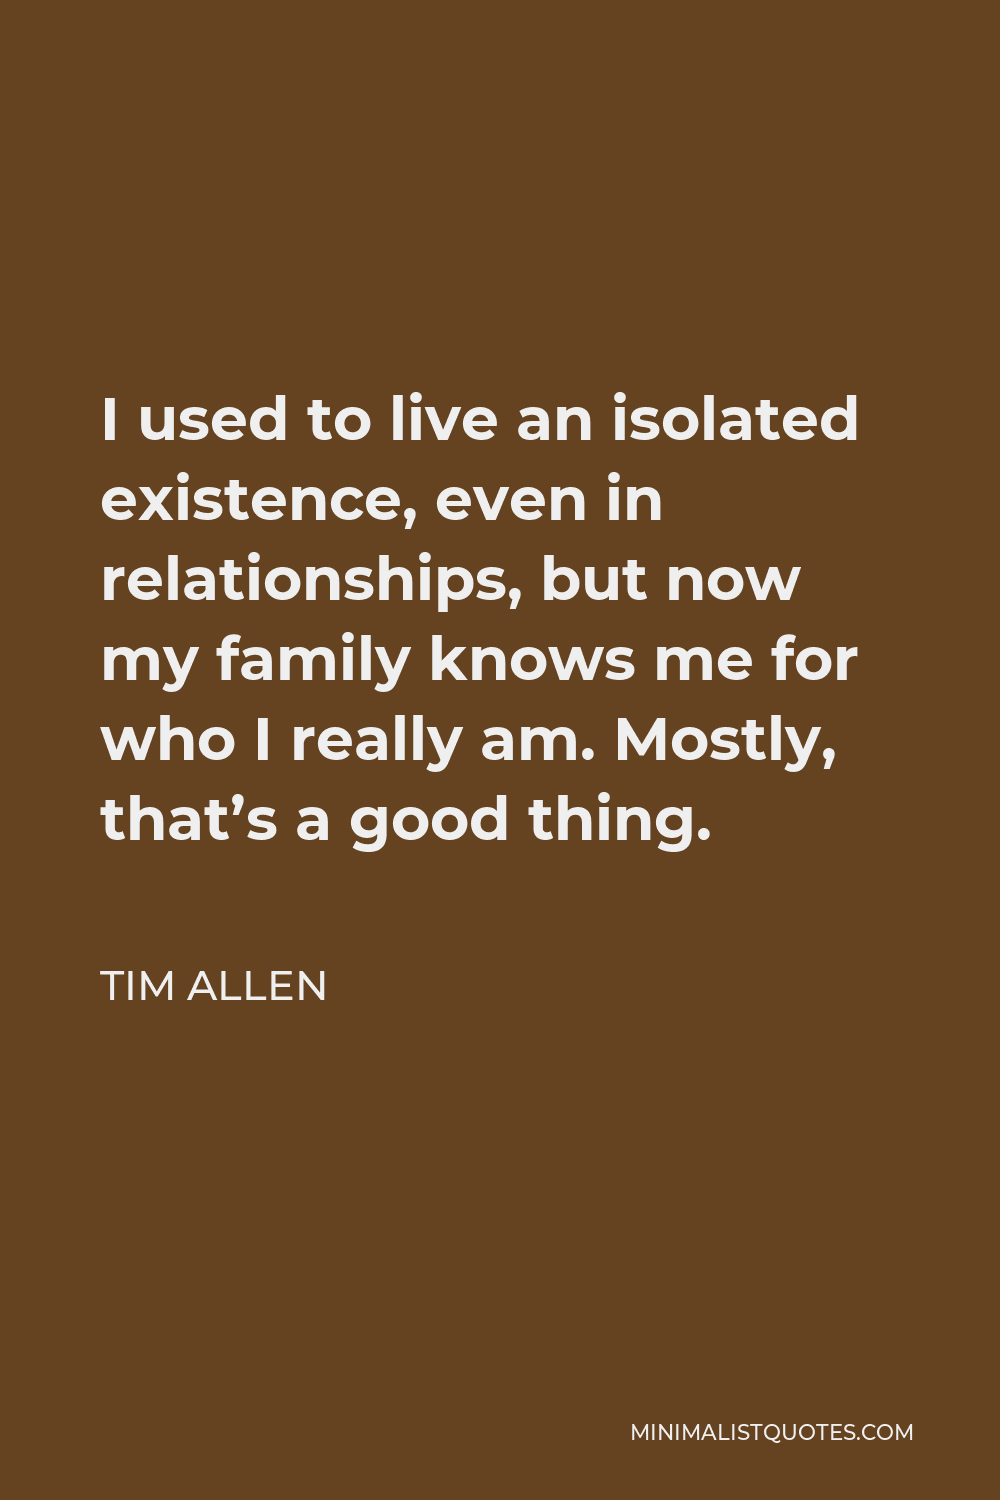 Tim Allen Quote - I used to live an isolated existence, even in relationships, but now my family knows me for who I really am. Mostly, that’s a good thing.